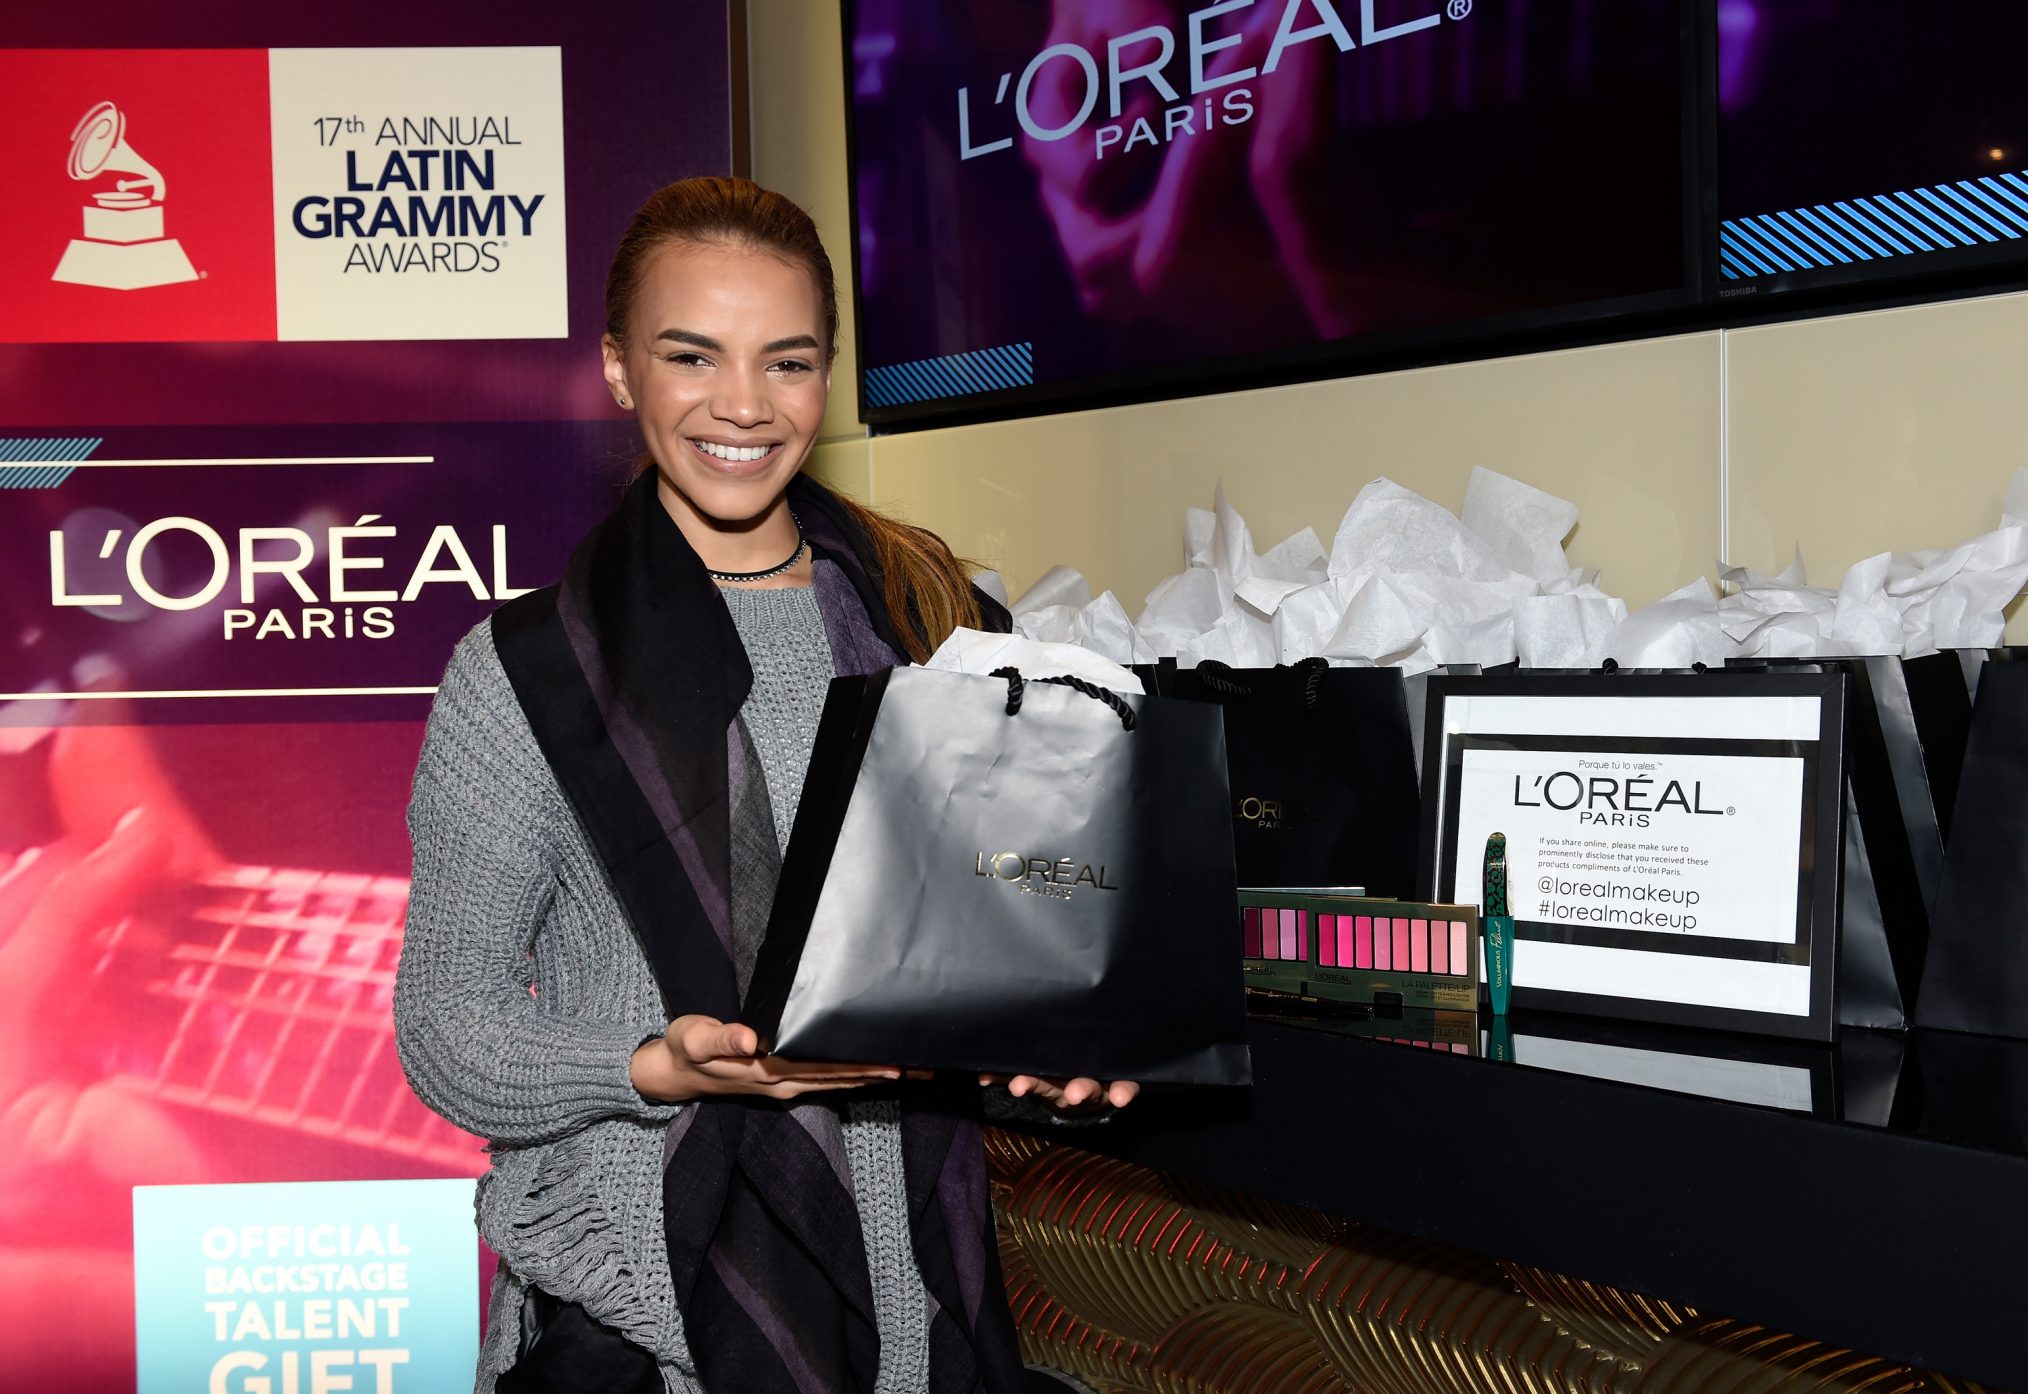 LAS VEGAS, NV - NOVEMBER 15:  Leslie Grace attends the gift lounge during the 17th annual Latin Grammy Awards at T-Mobile Arena on November 15, 2016 in Las Vegas, Nevada.  (Photo by David Becker/WireImage)